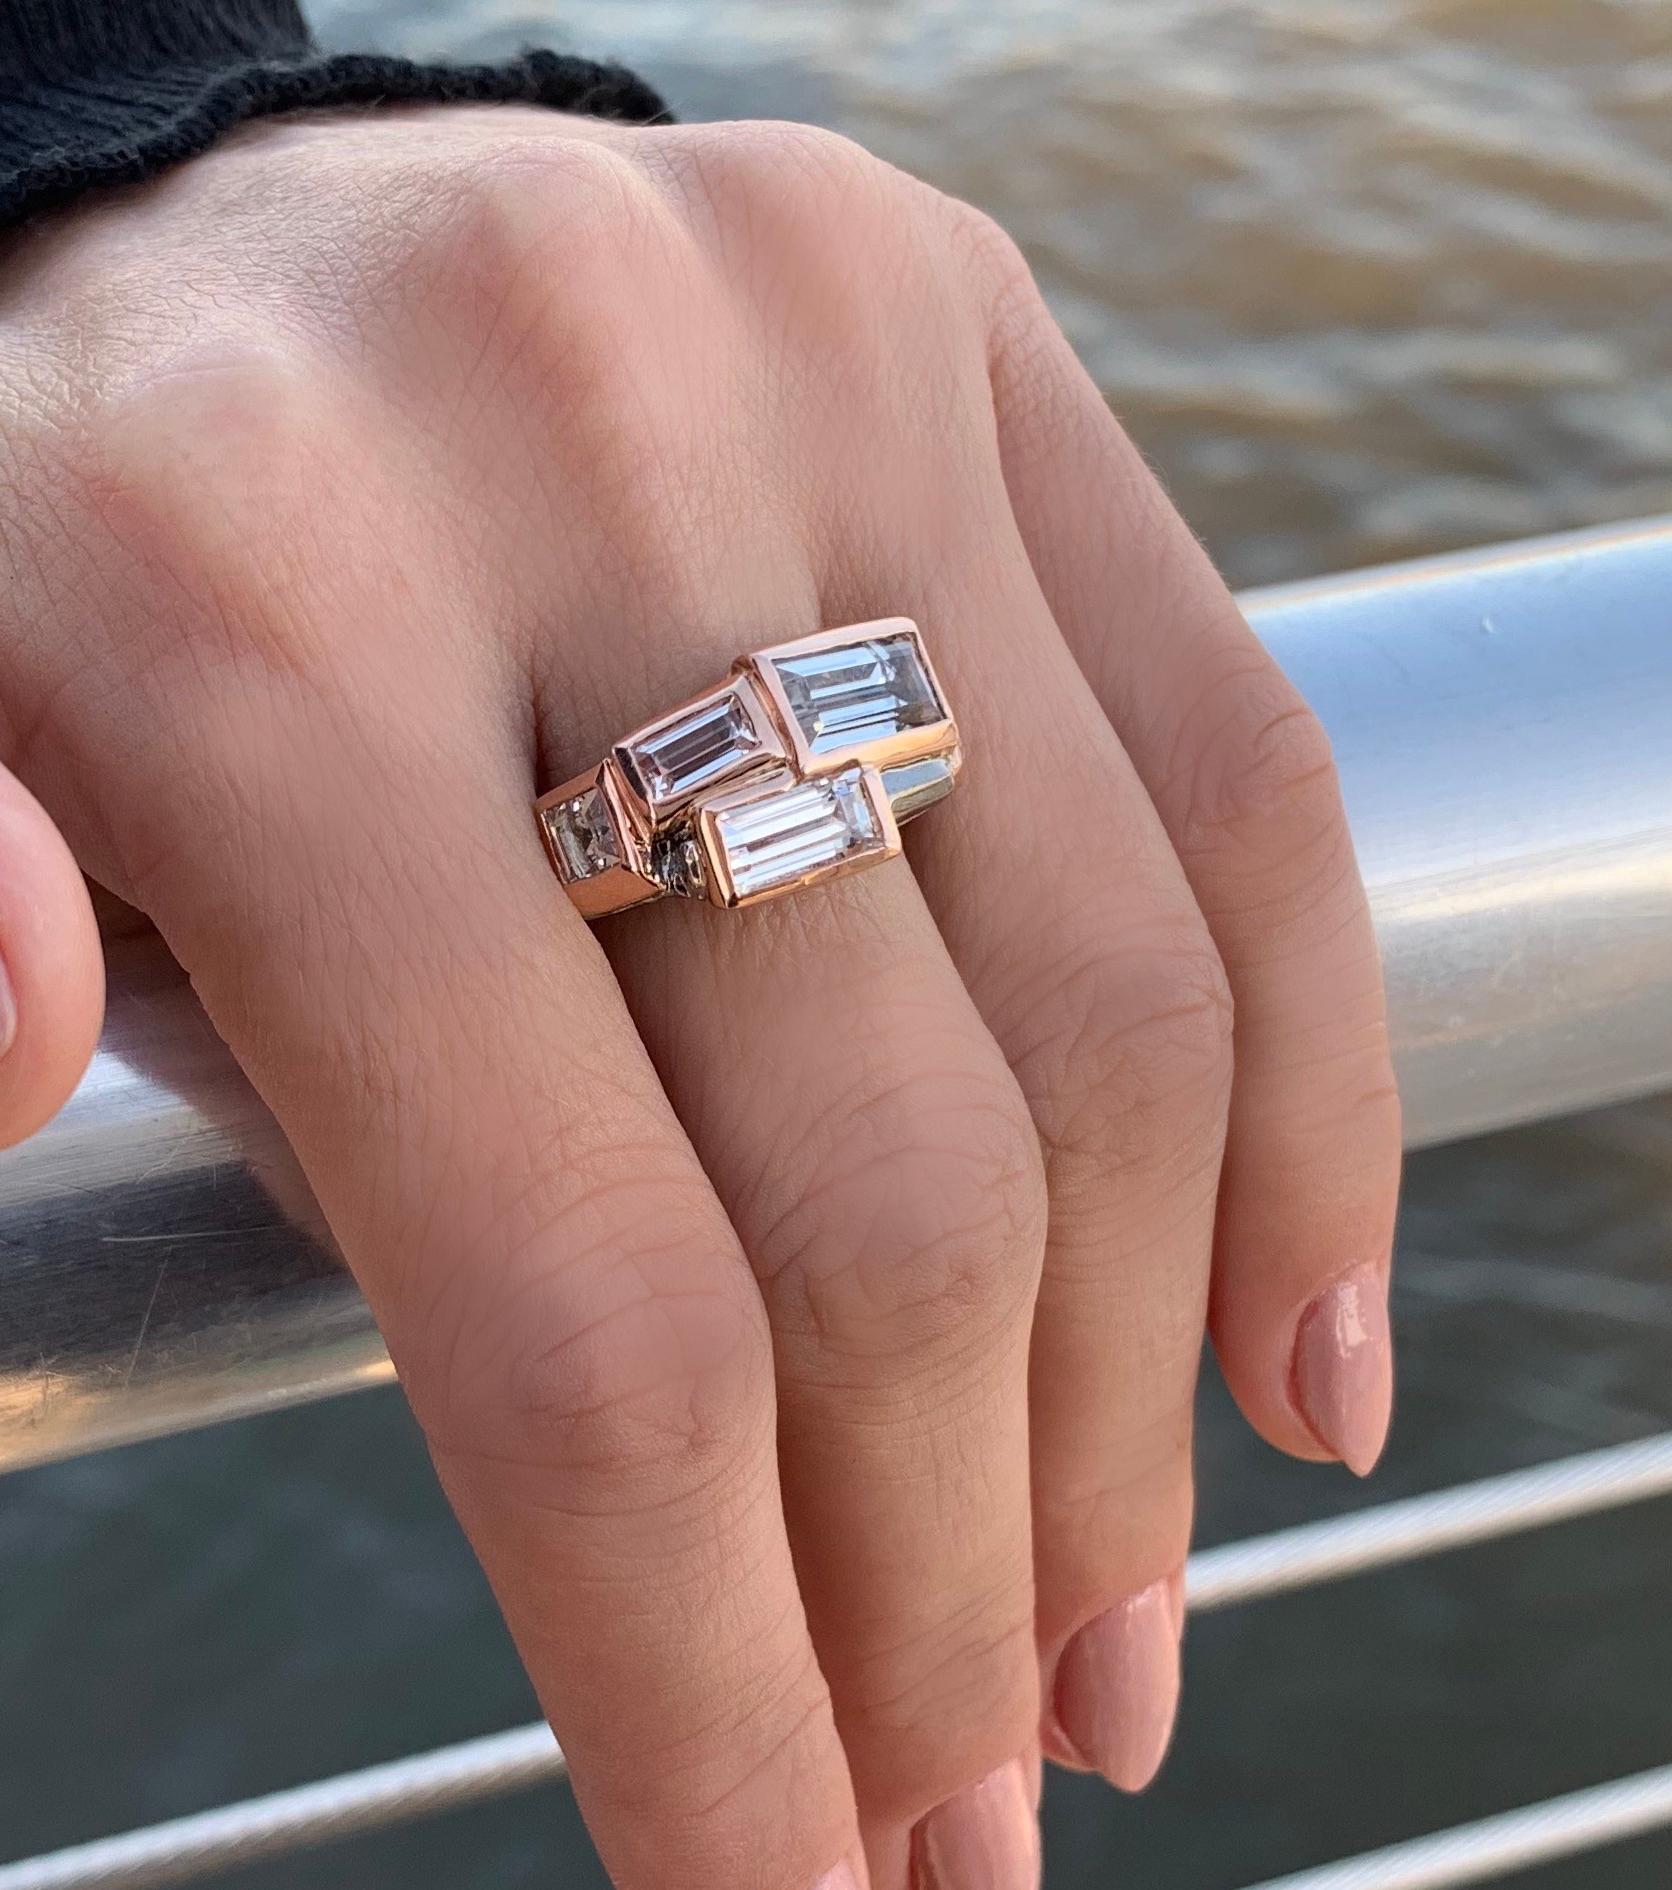 The Mineral ring congers the effect of a natural free form mineral growing in nature. The rose gold settings are inlaid in the blackened sterling silver shank and set with white topaz baguettes and a square cut to create a bold modern feel.

14kt